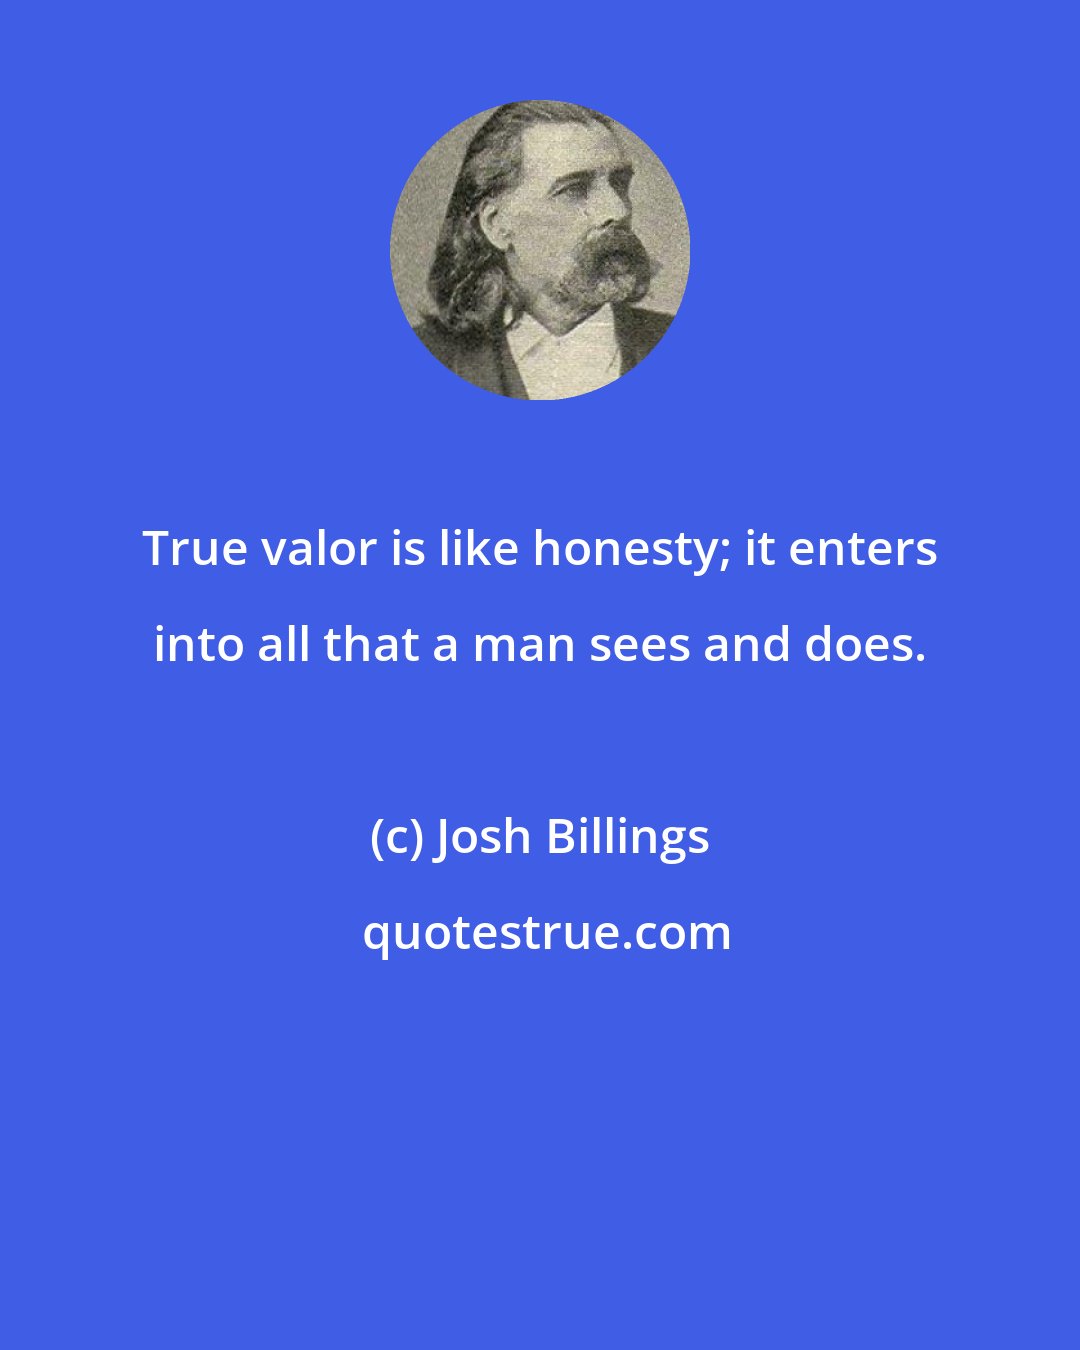 Josh Billings: True valor is like honesty; it enters into all that a man sees and does.